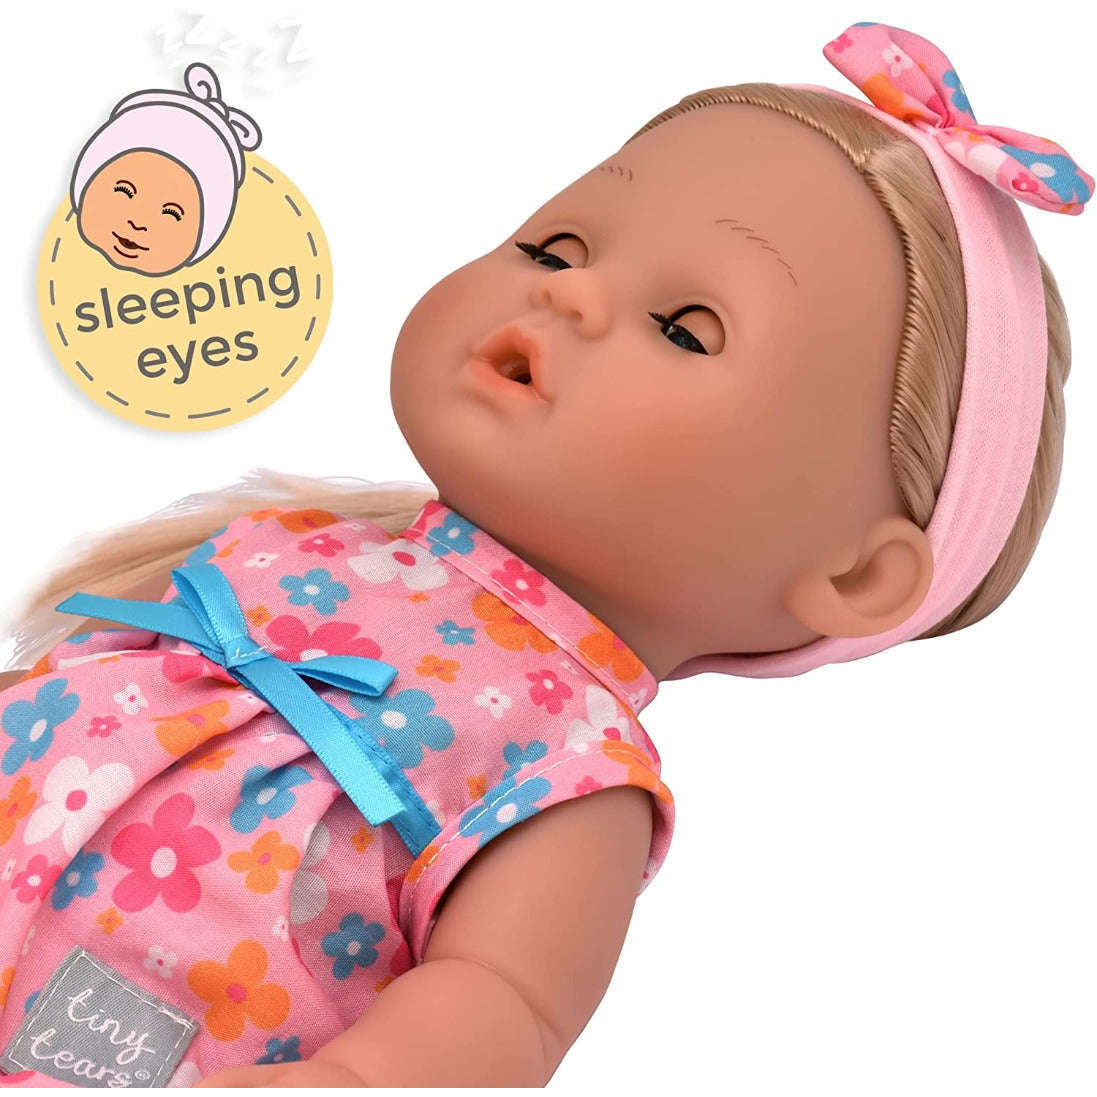 Toys N Tuck:Tiny Tears - Classic Crying And Wetting Doll,Tiny Tears